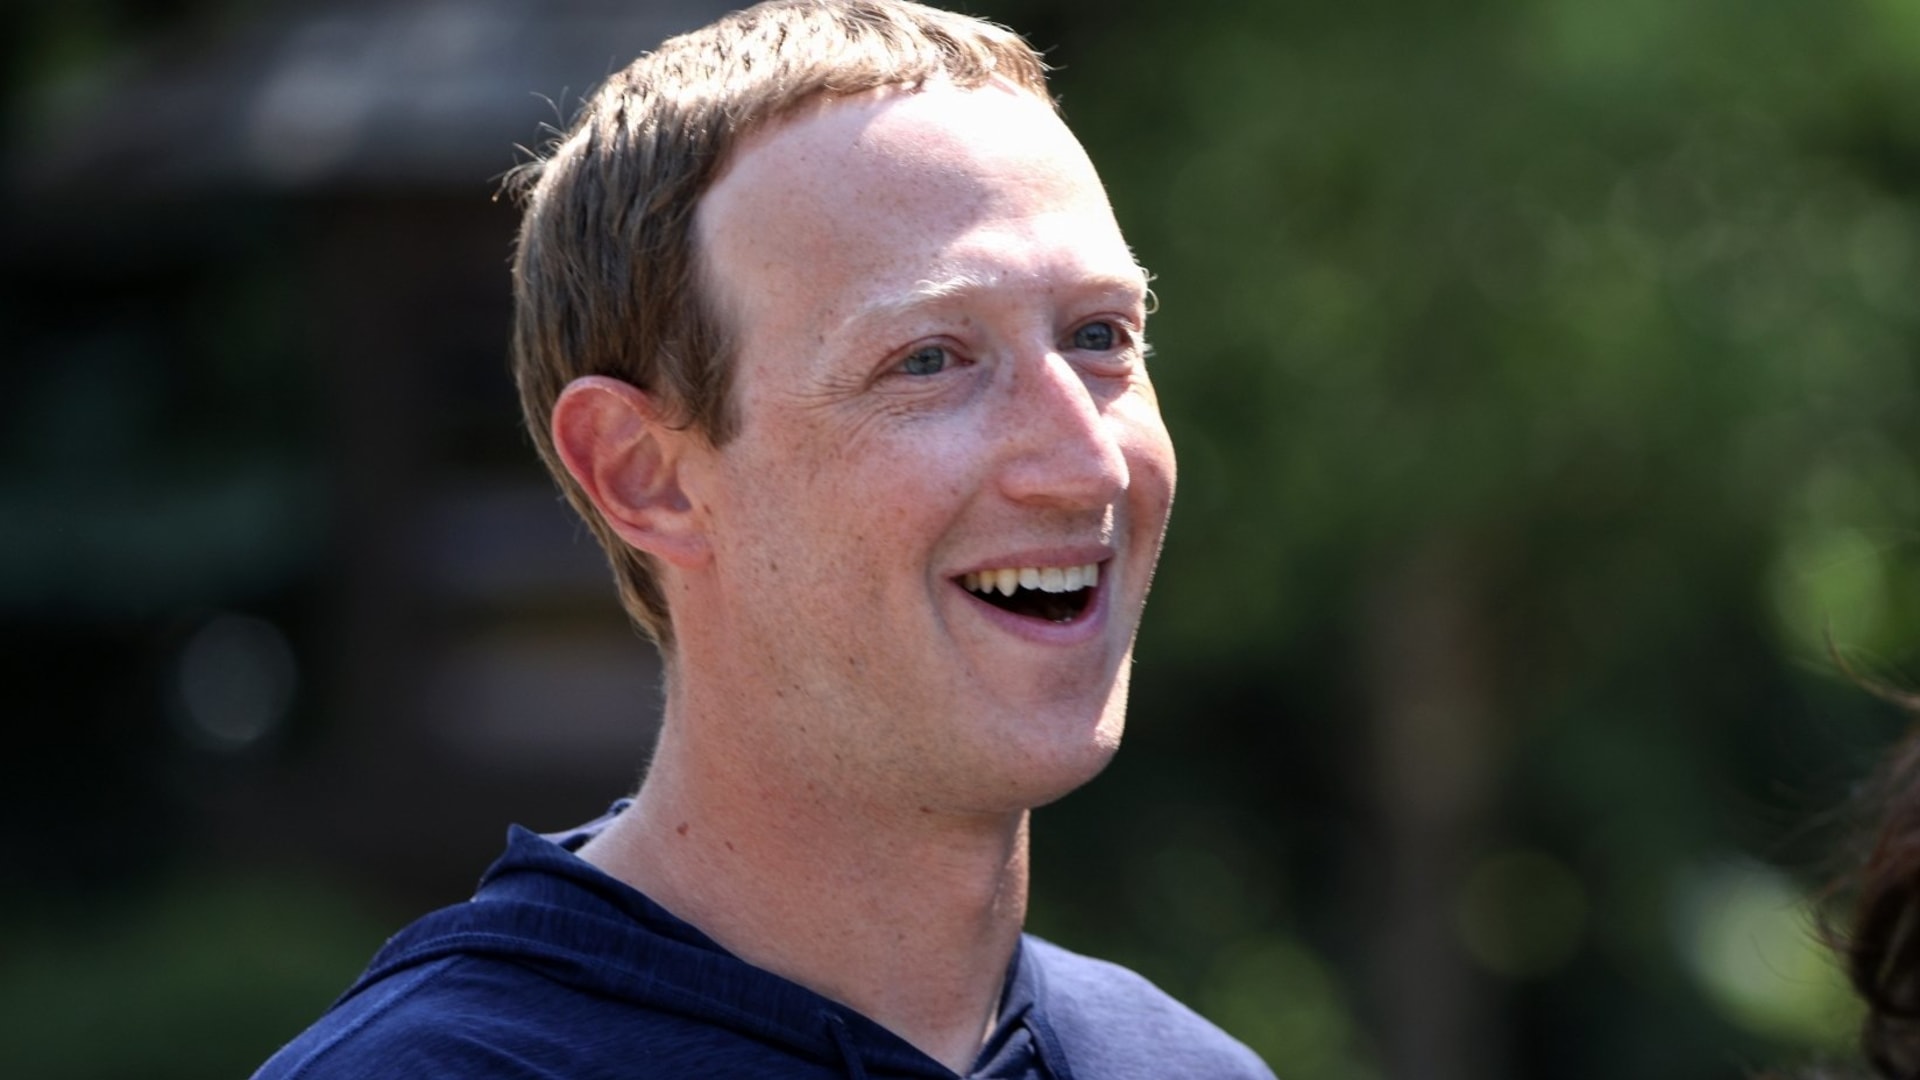 Mark Zuckerberg Just Doesn't Care And It's the Single Biggest Key to His Success